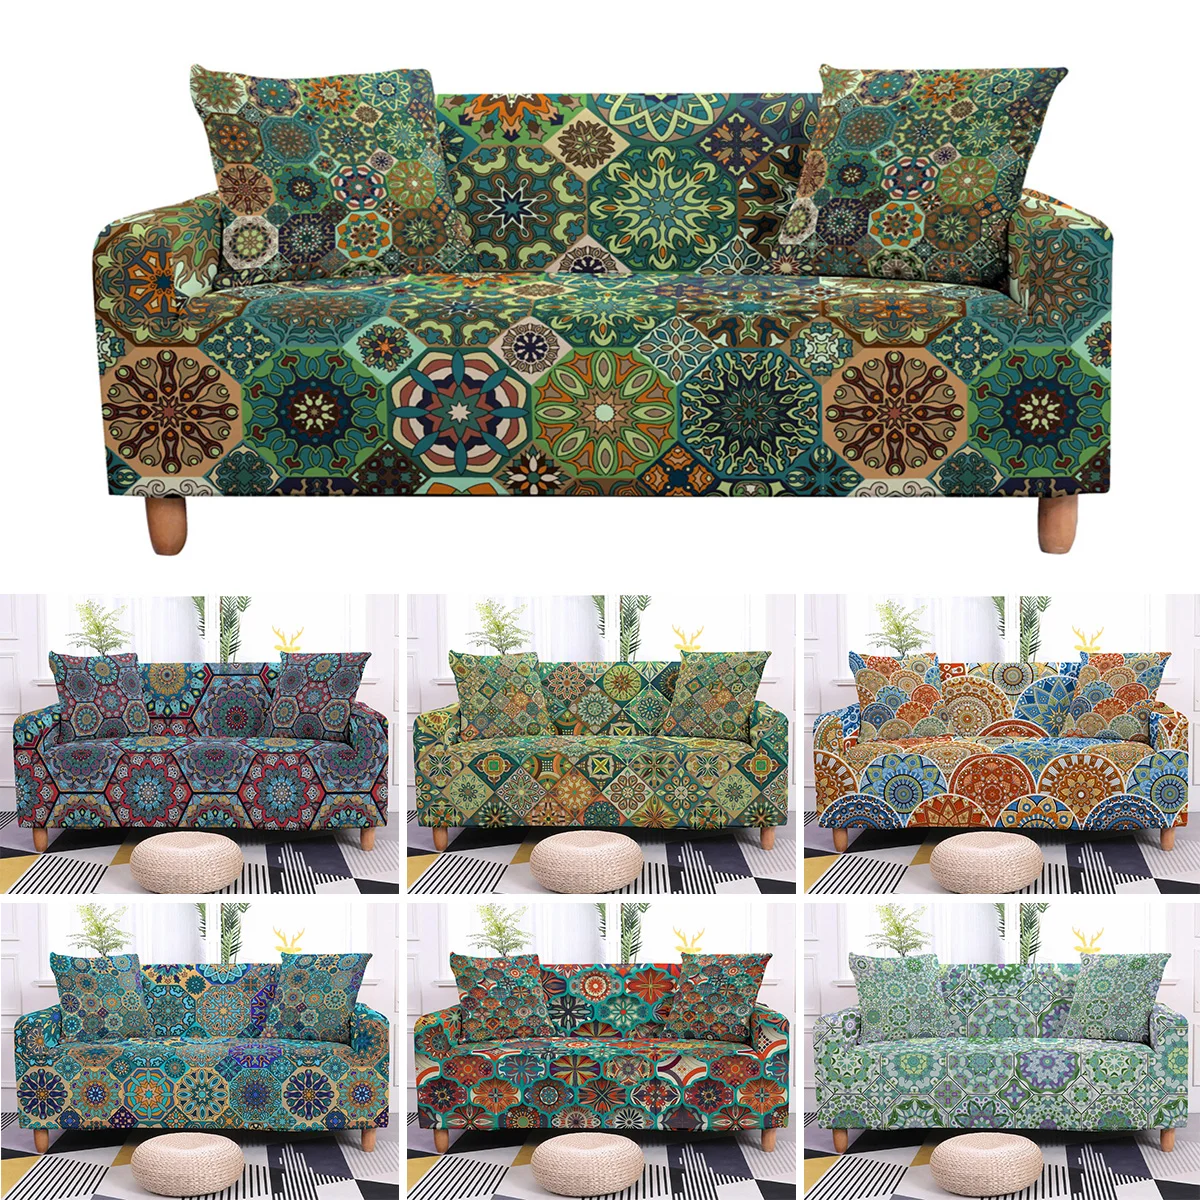 

India Mandala Elastic Sofa Cover Stretch Couch Slipcover Living Room Sectional L-Shape Sofa Furniture Protector 1/2/3/4 Seater